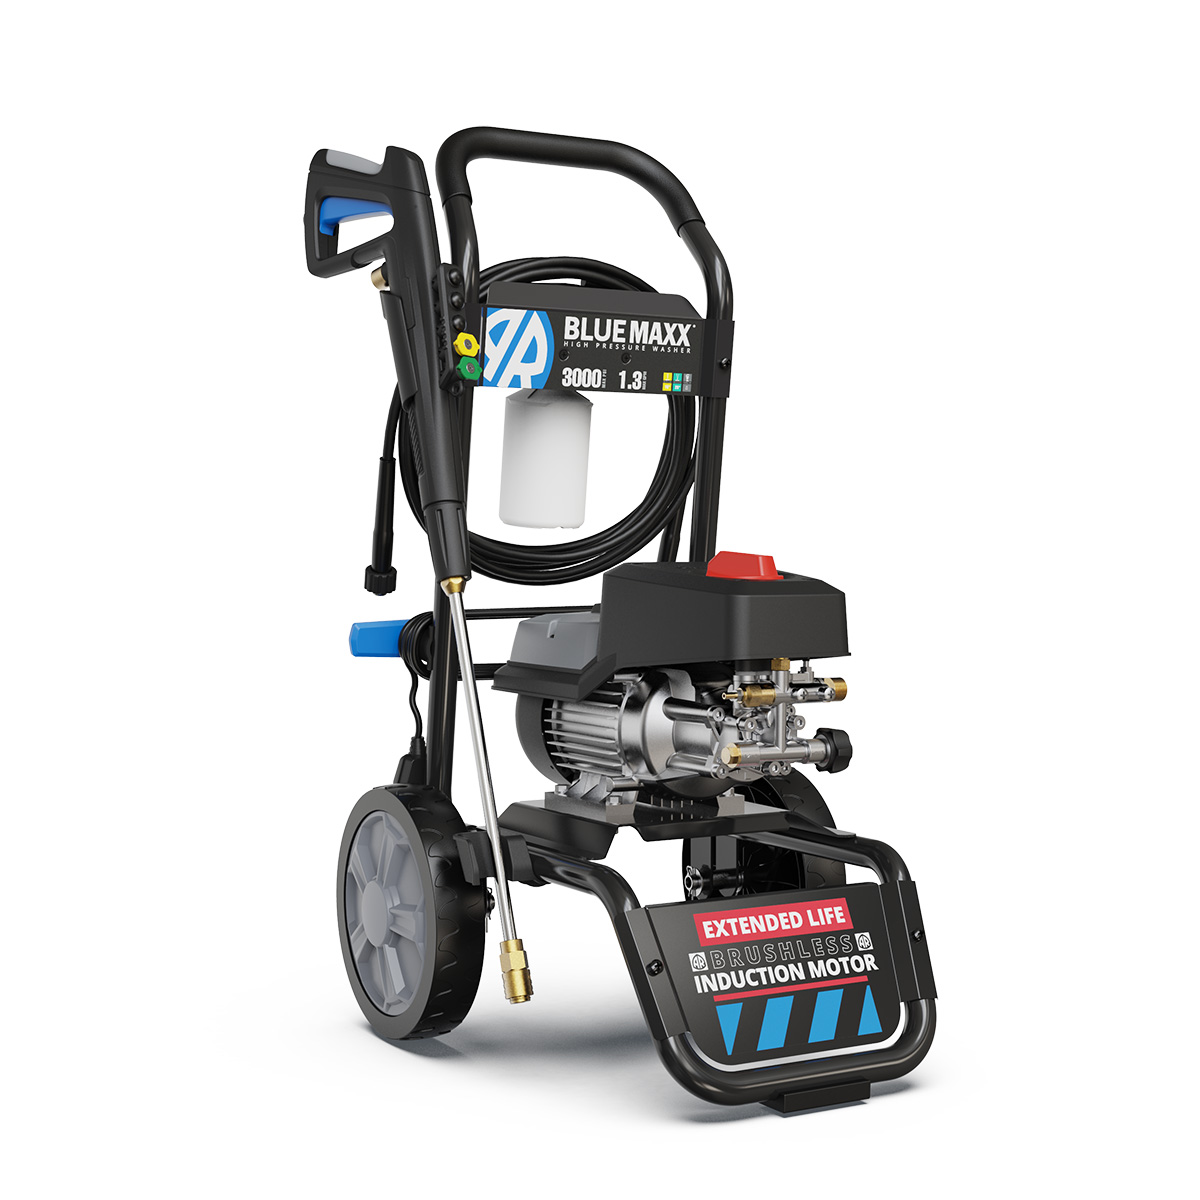 AR Blue Clean MAXX, MAXX3000, 3000 PSI, 1.3 GPM, 15 amp, Induction Motor, Electric Pressure Washer Questions & Answers